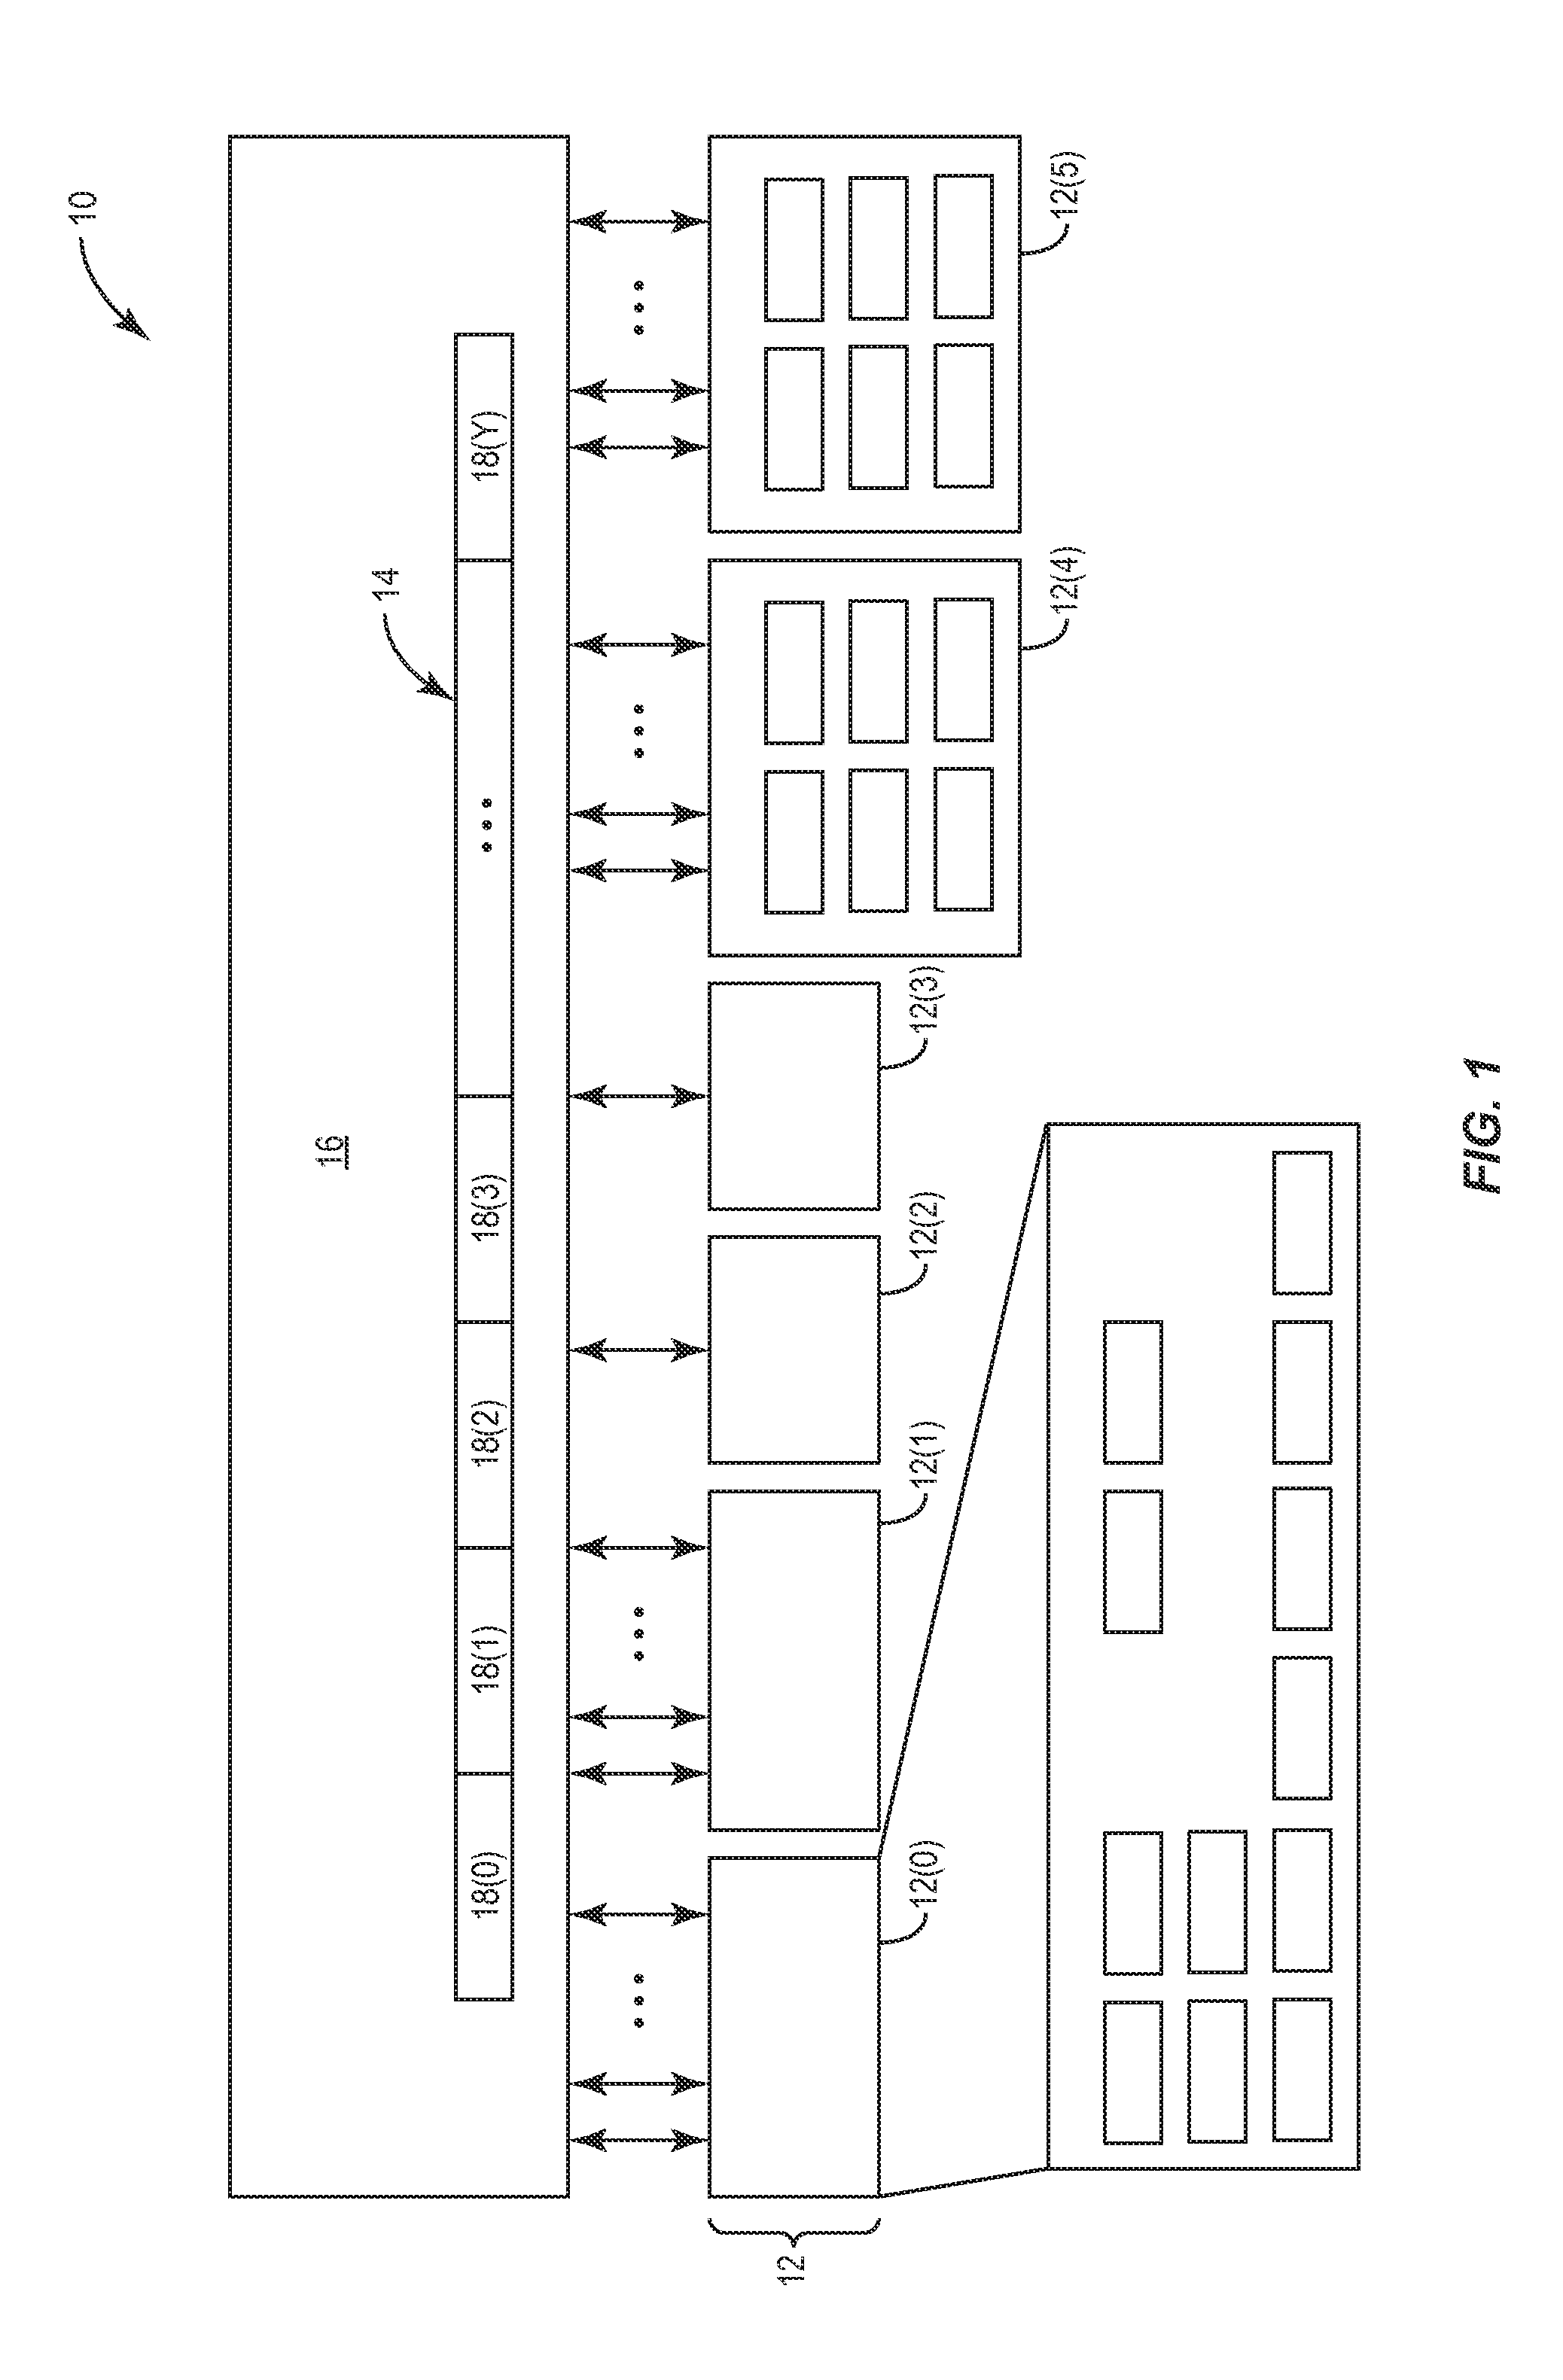 Vector processing engines having programmable data path configurations for providing multi-mode vector processing, and related vector processors, systems, and methods